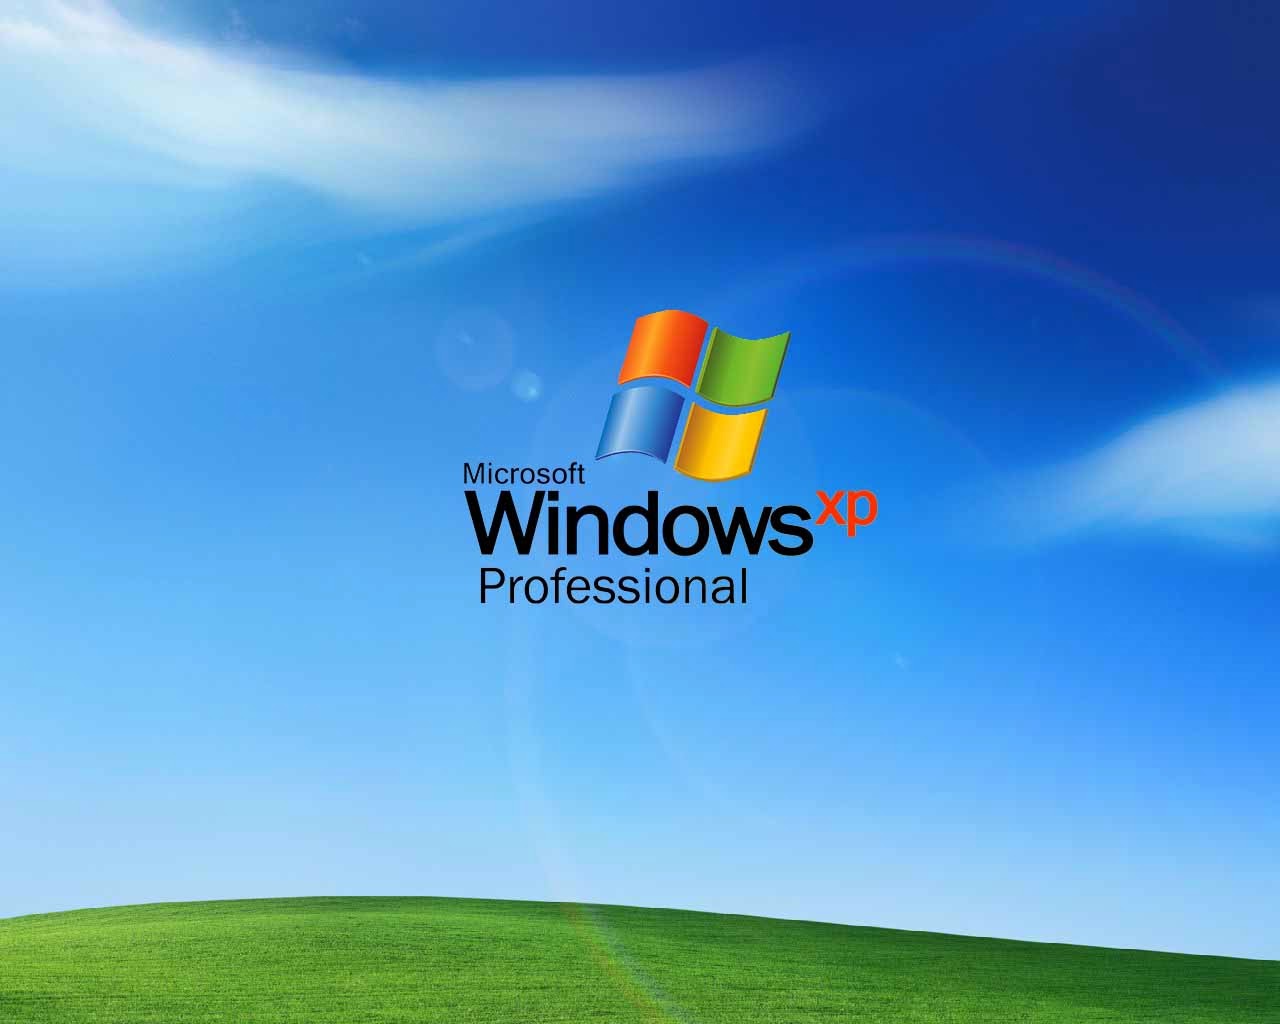 HD Wallpapers 1080p windows xp - Mobile wallpapers